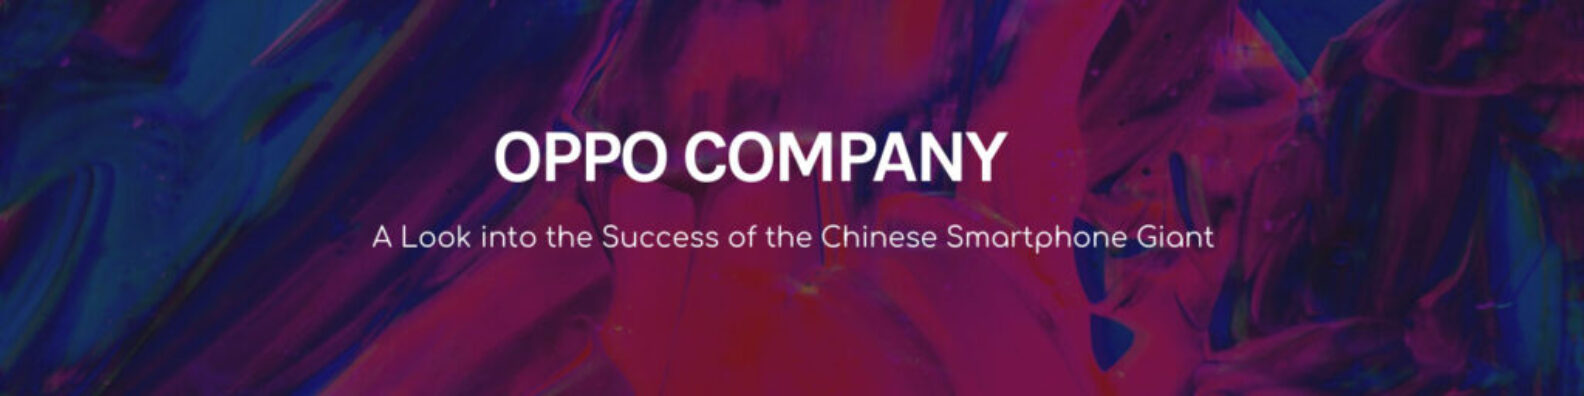 Oppo Company and its owner